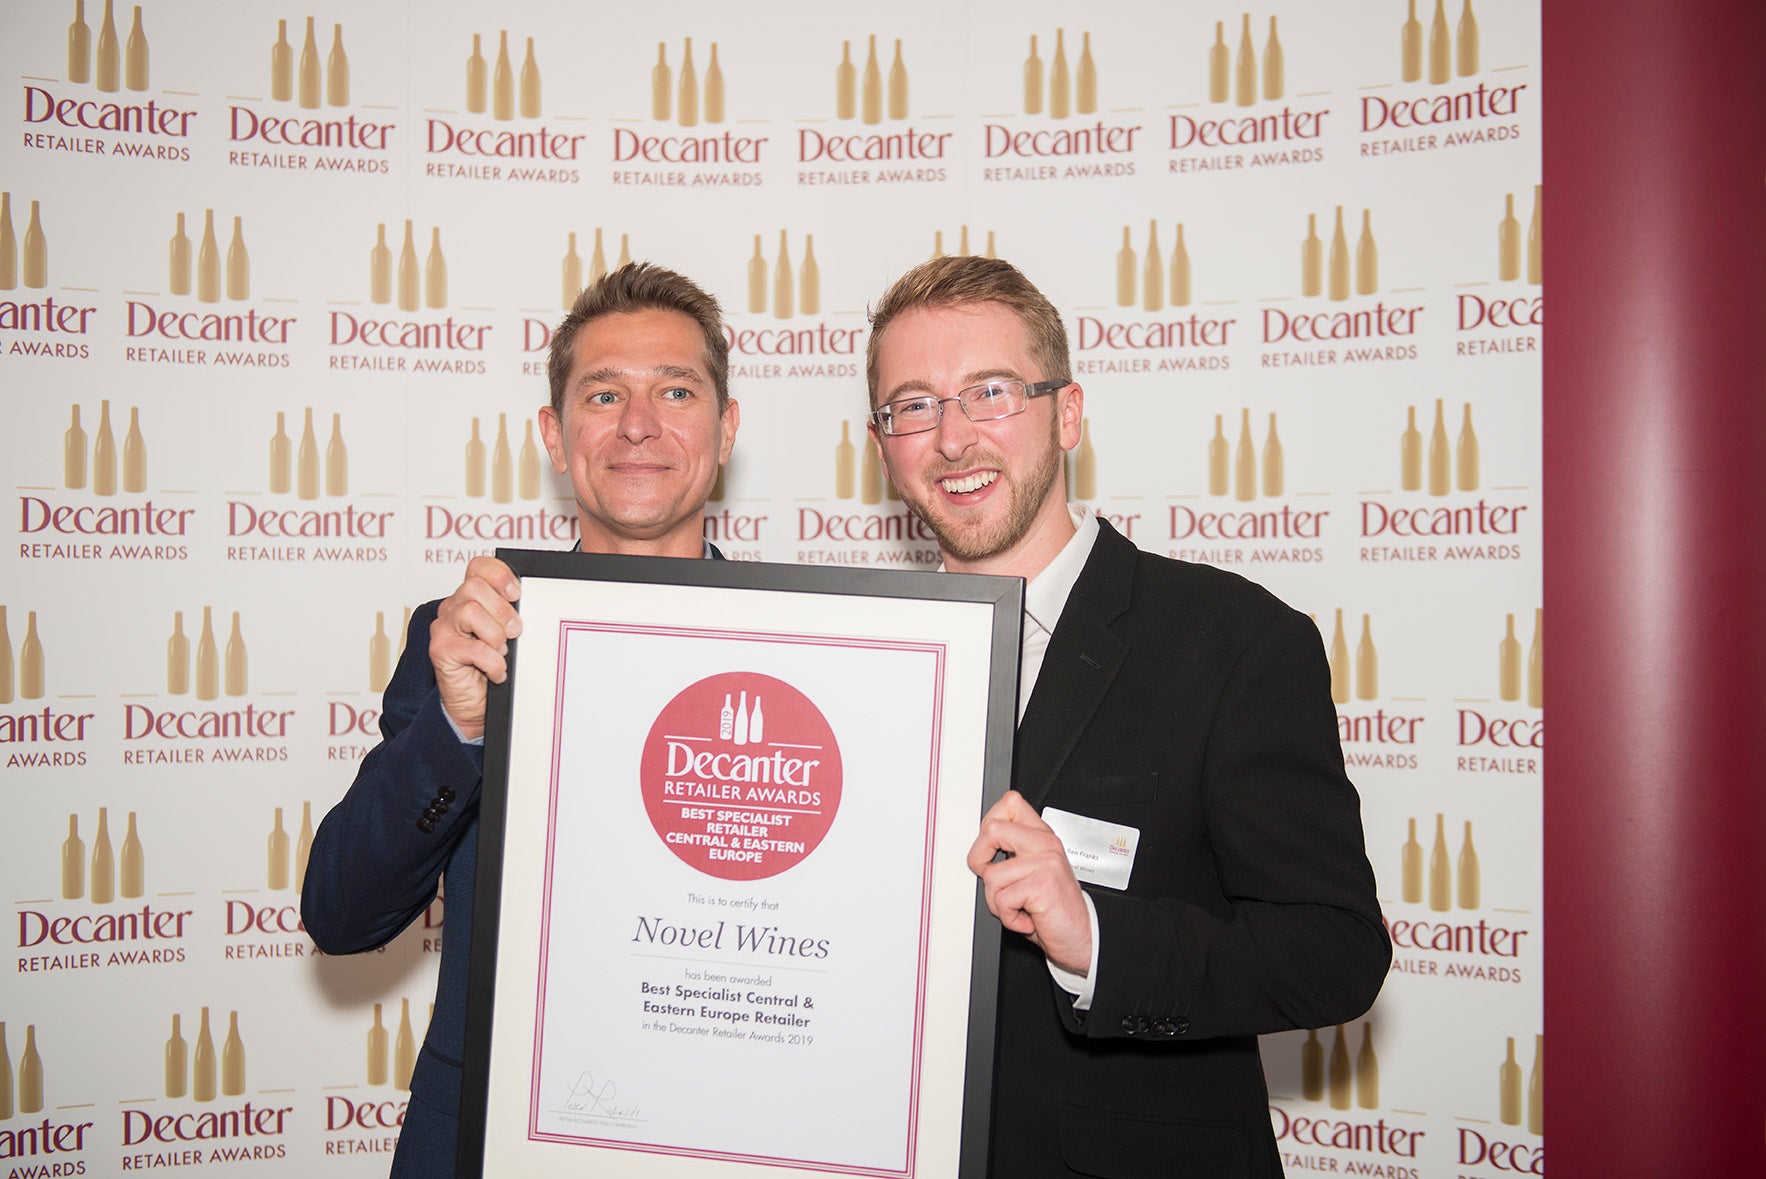 Novel Wines wins the Decanter Award for 'Best Central & Eastern European Retailer' second year running!